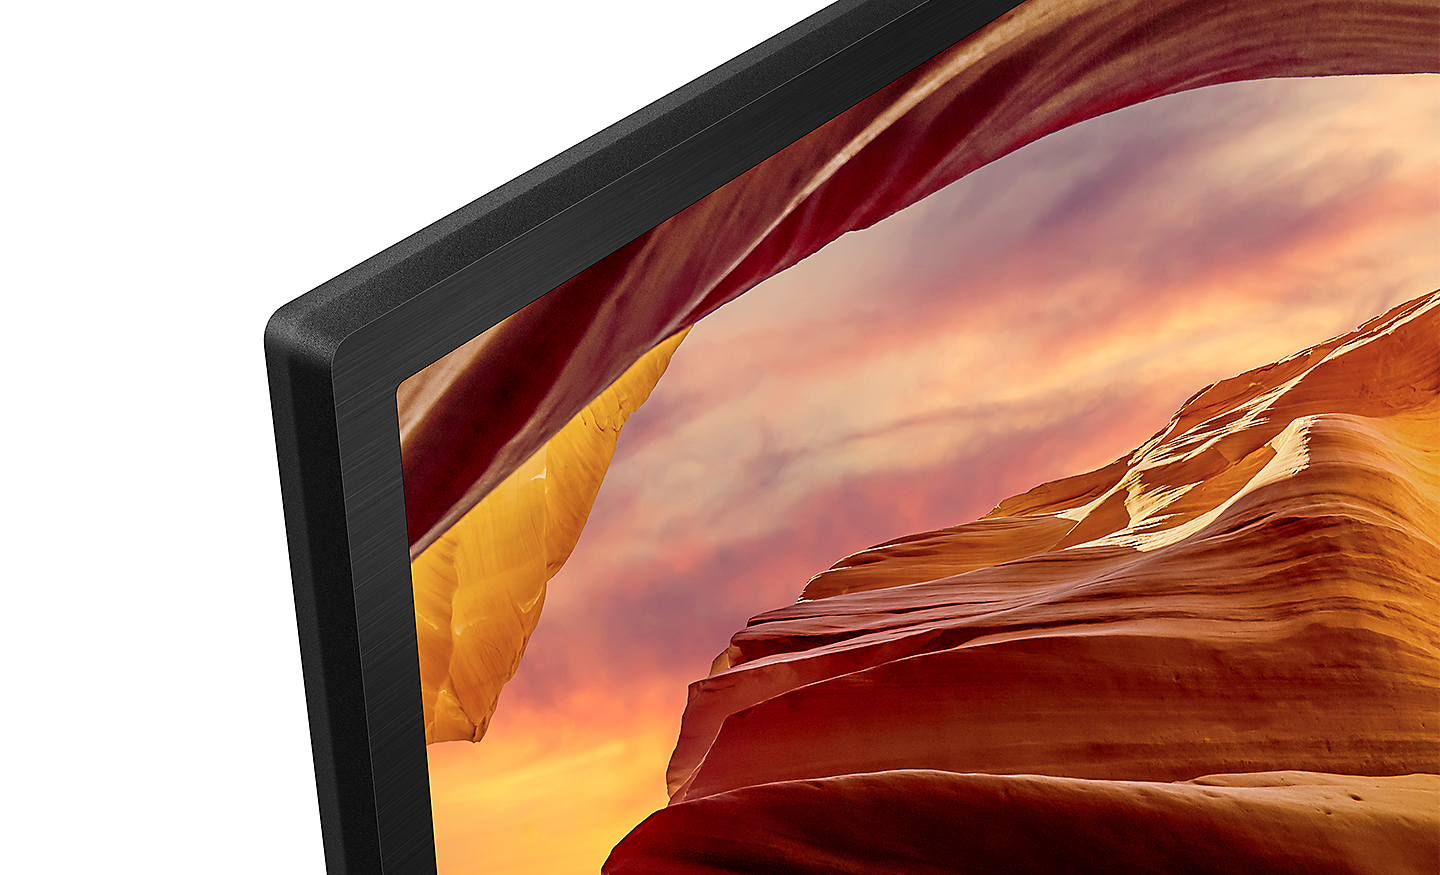 Close-up of the bezel of X75L Series BRAVIA TV with screenshot of rock formations